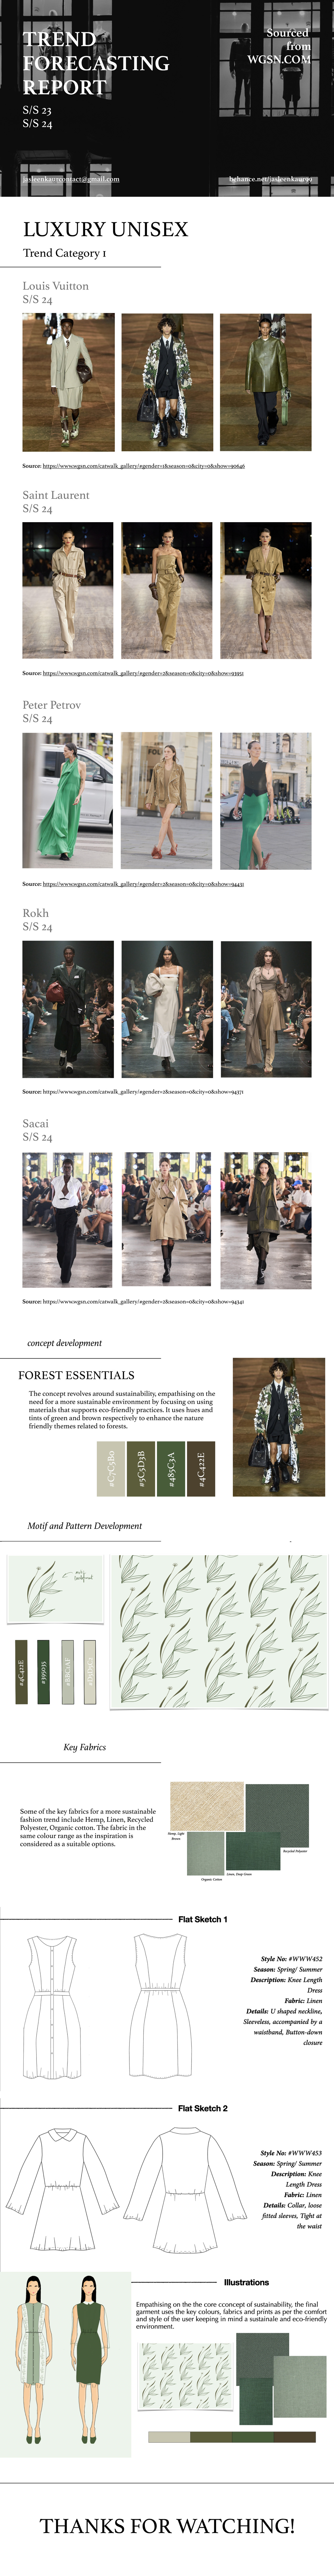 trend FASHION TRENDS trend research forecast Fashion Forecasting trend analysis trendspotting